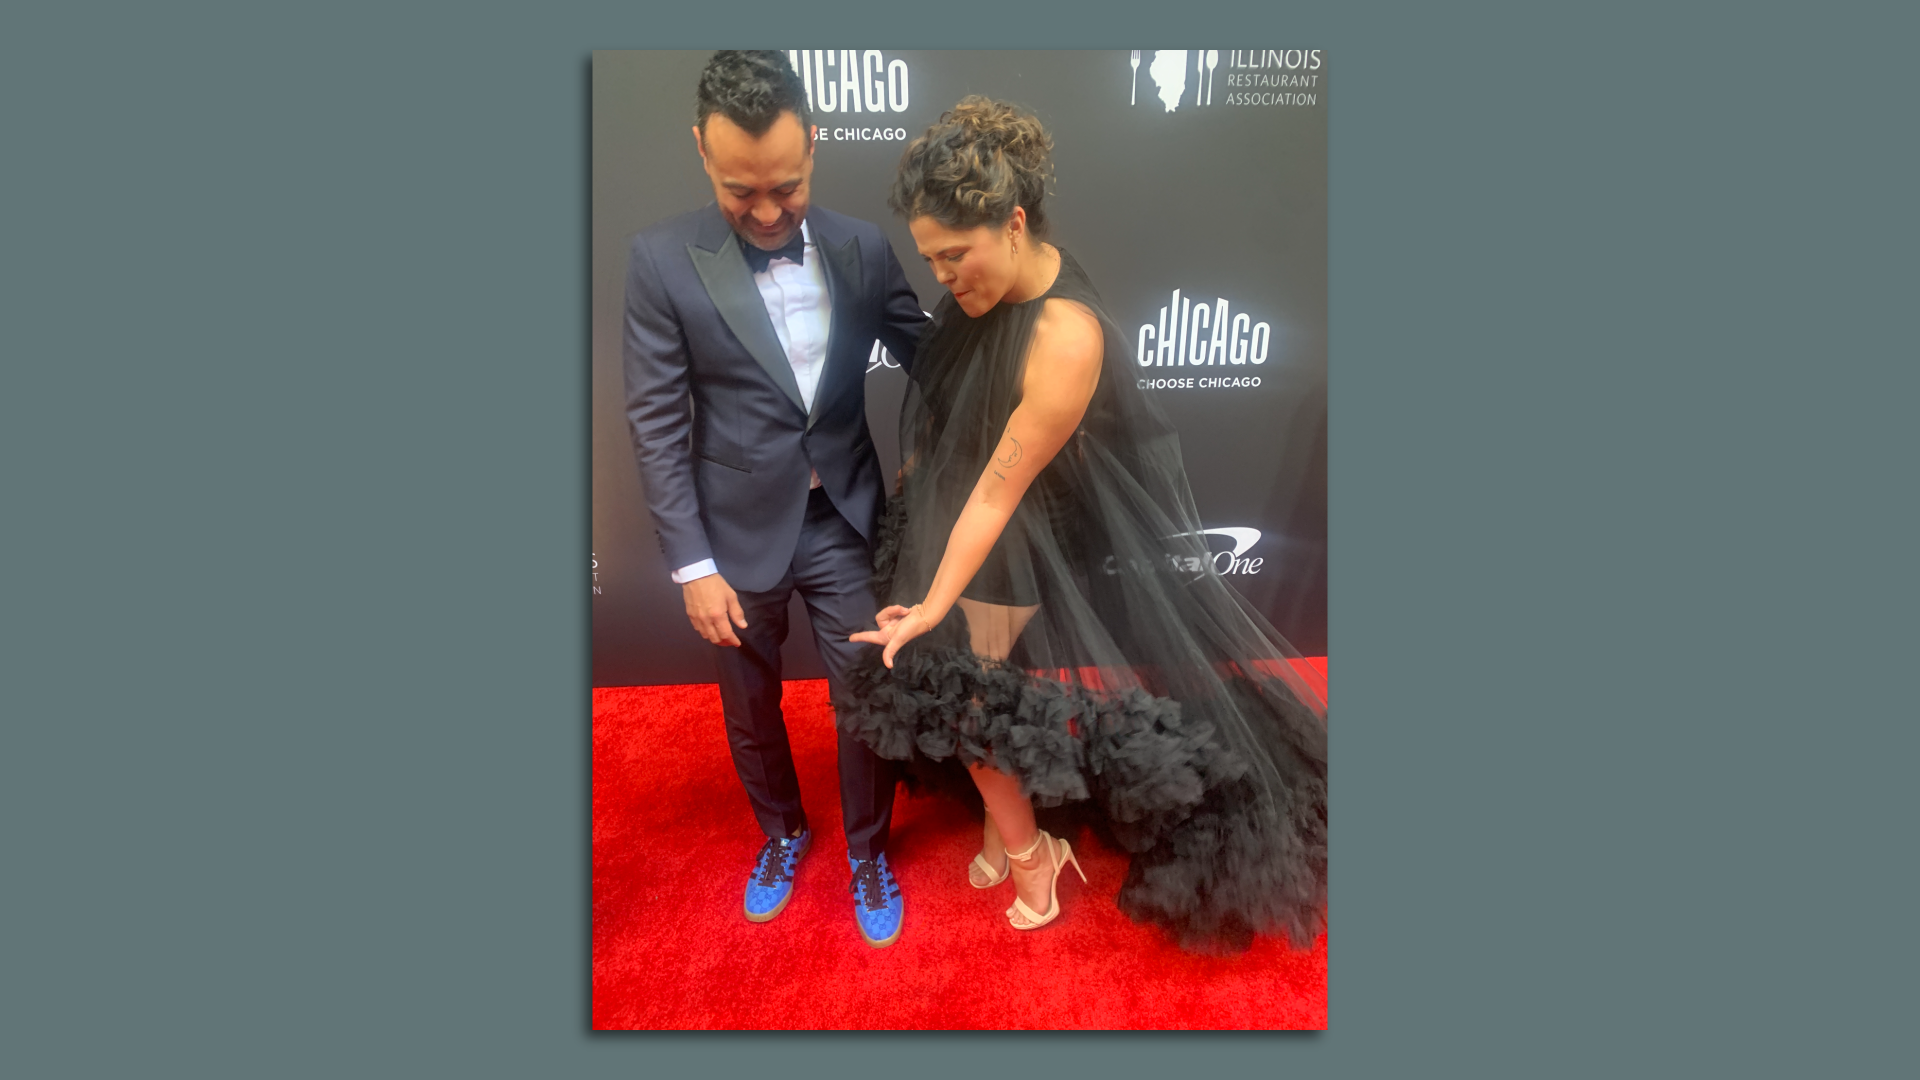 Michael Diaz De Leon from Denver and his date show off their shoes on the red carpet.